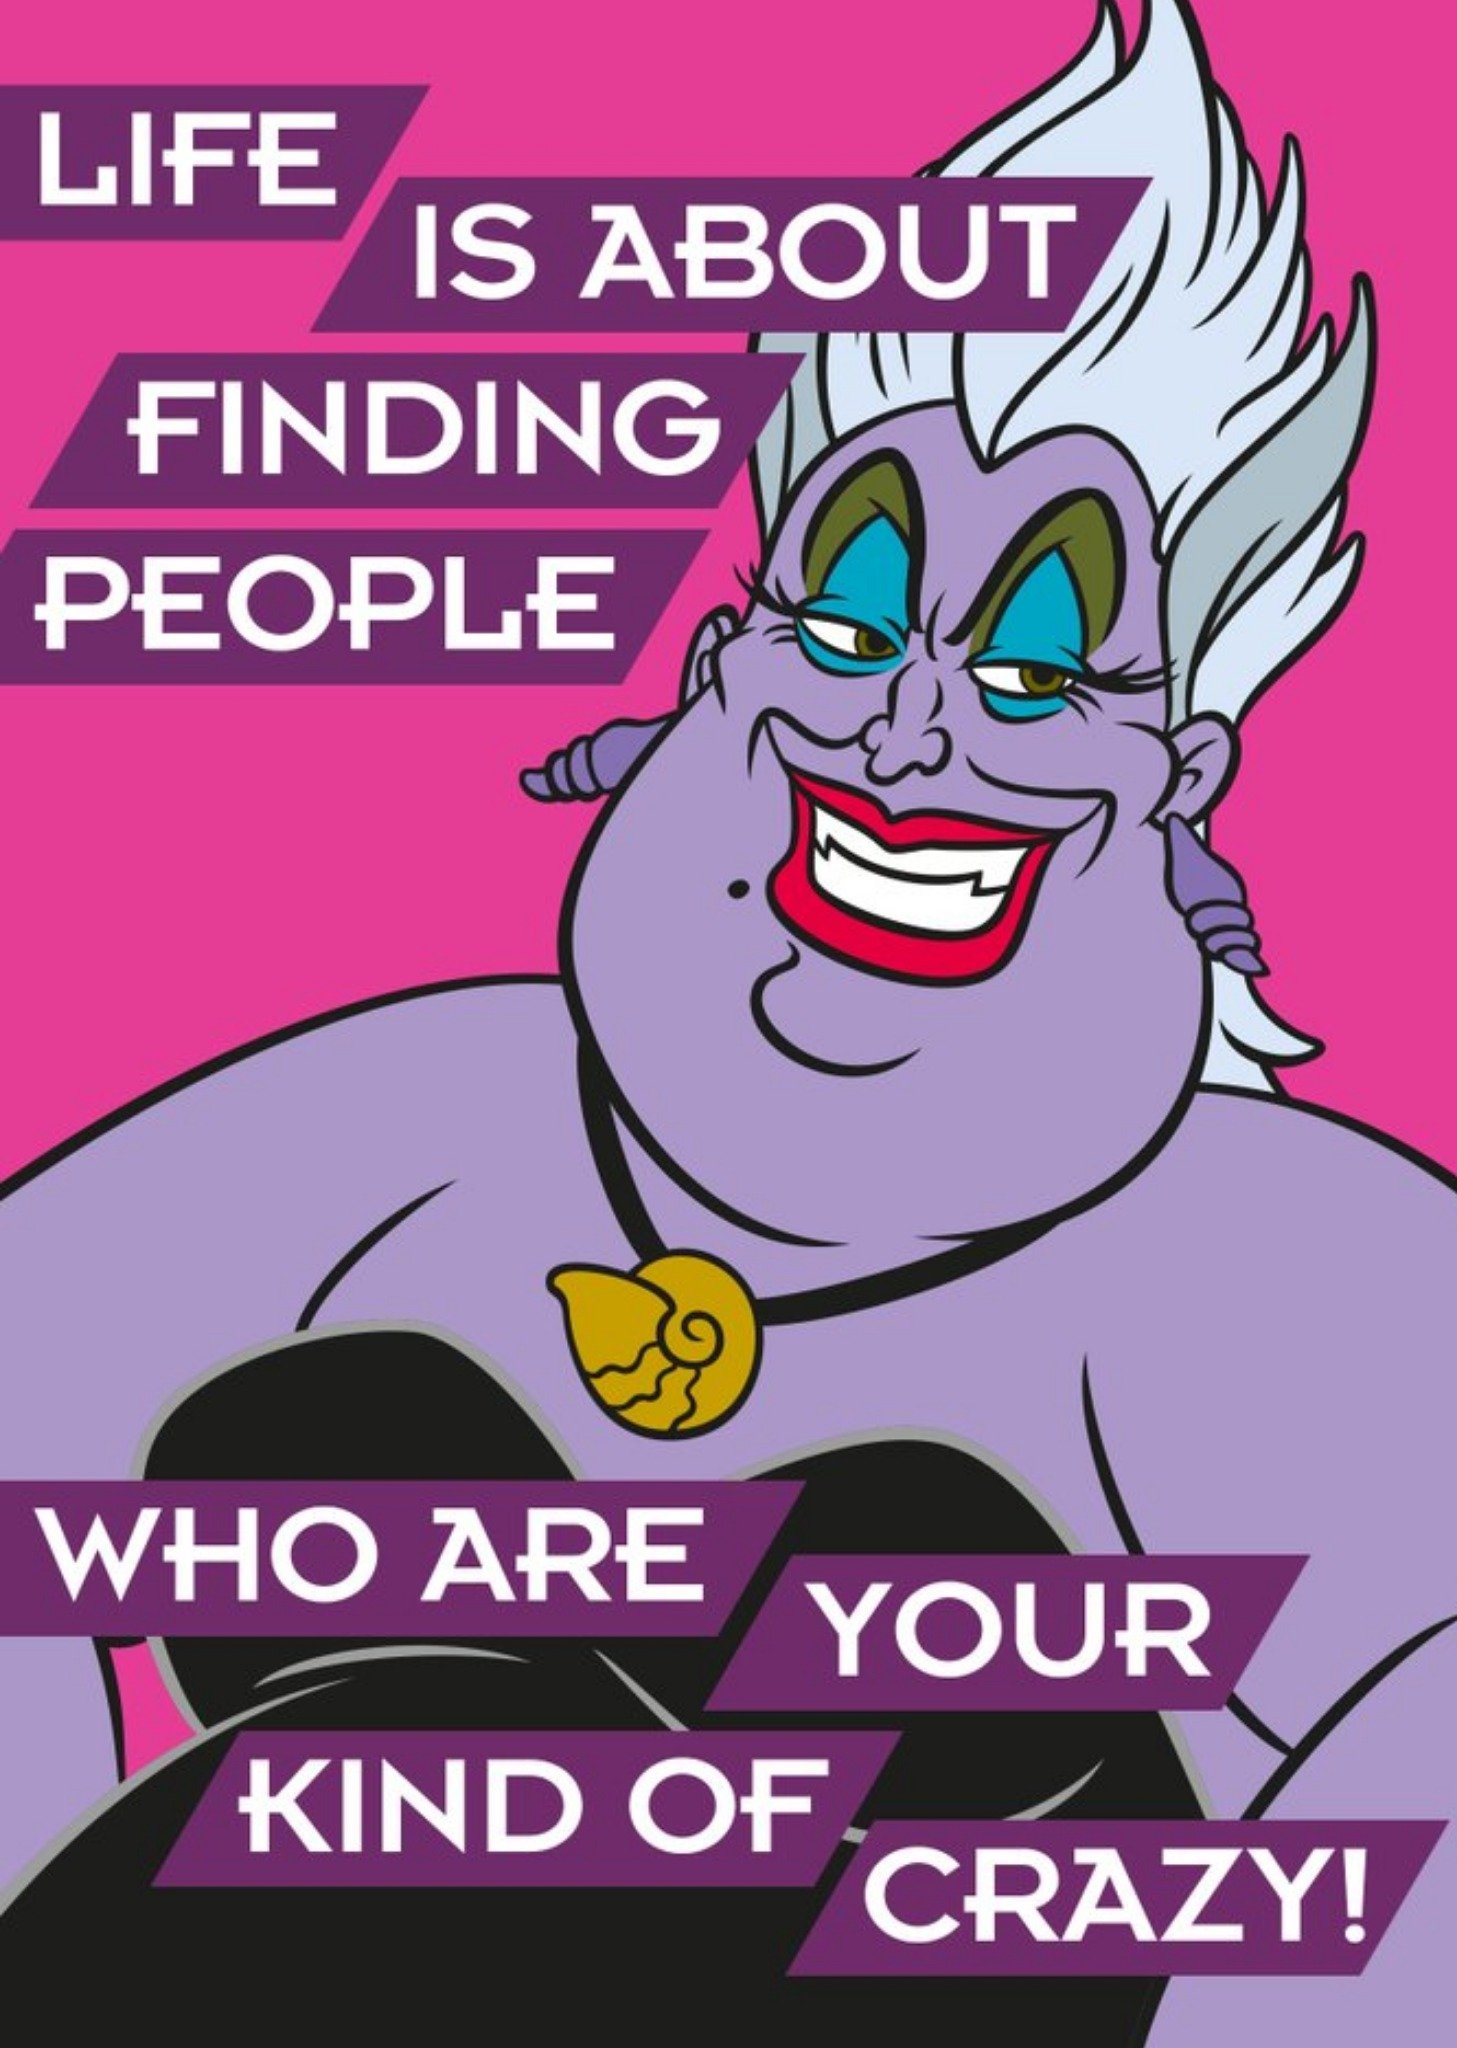 Disney The Little Mermaid Ursula Find Your Kind Of Crazy Card, Large